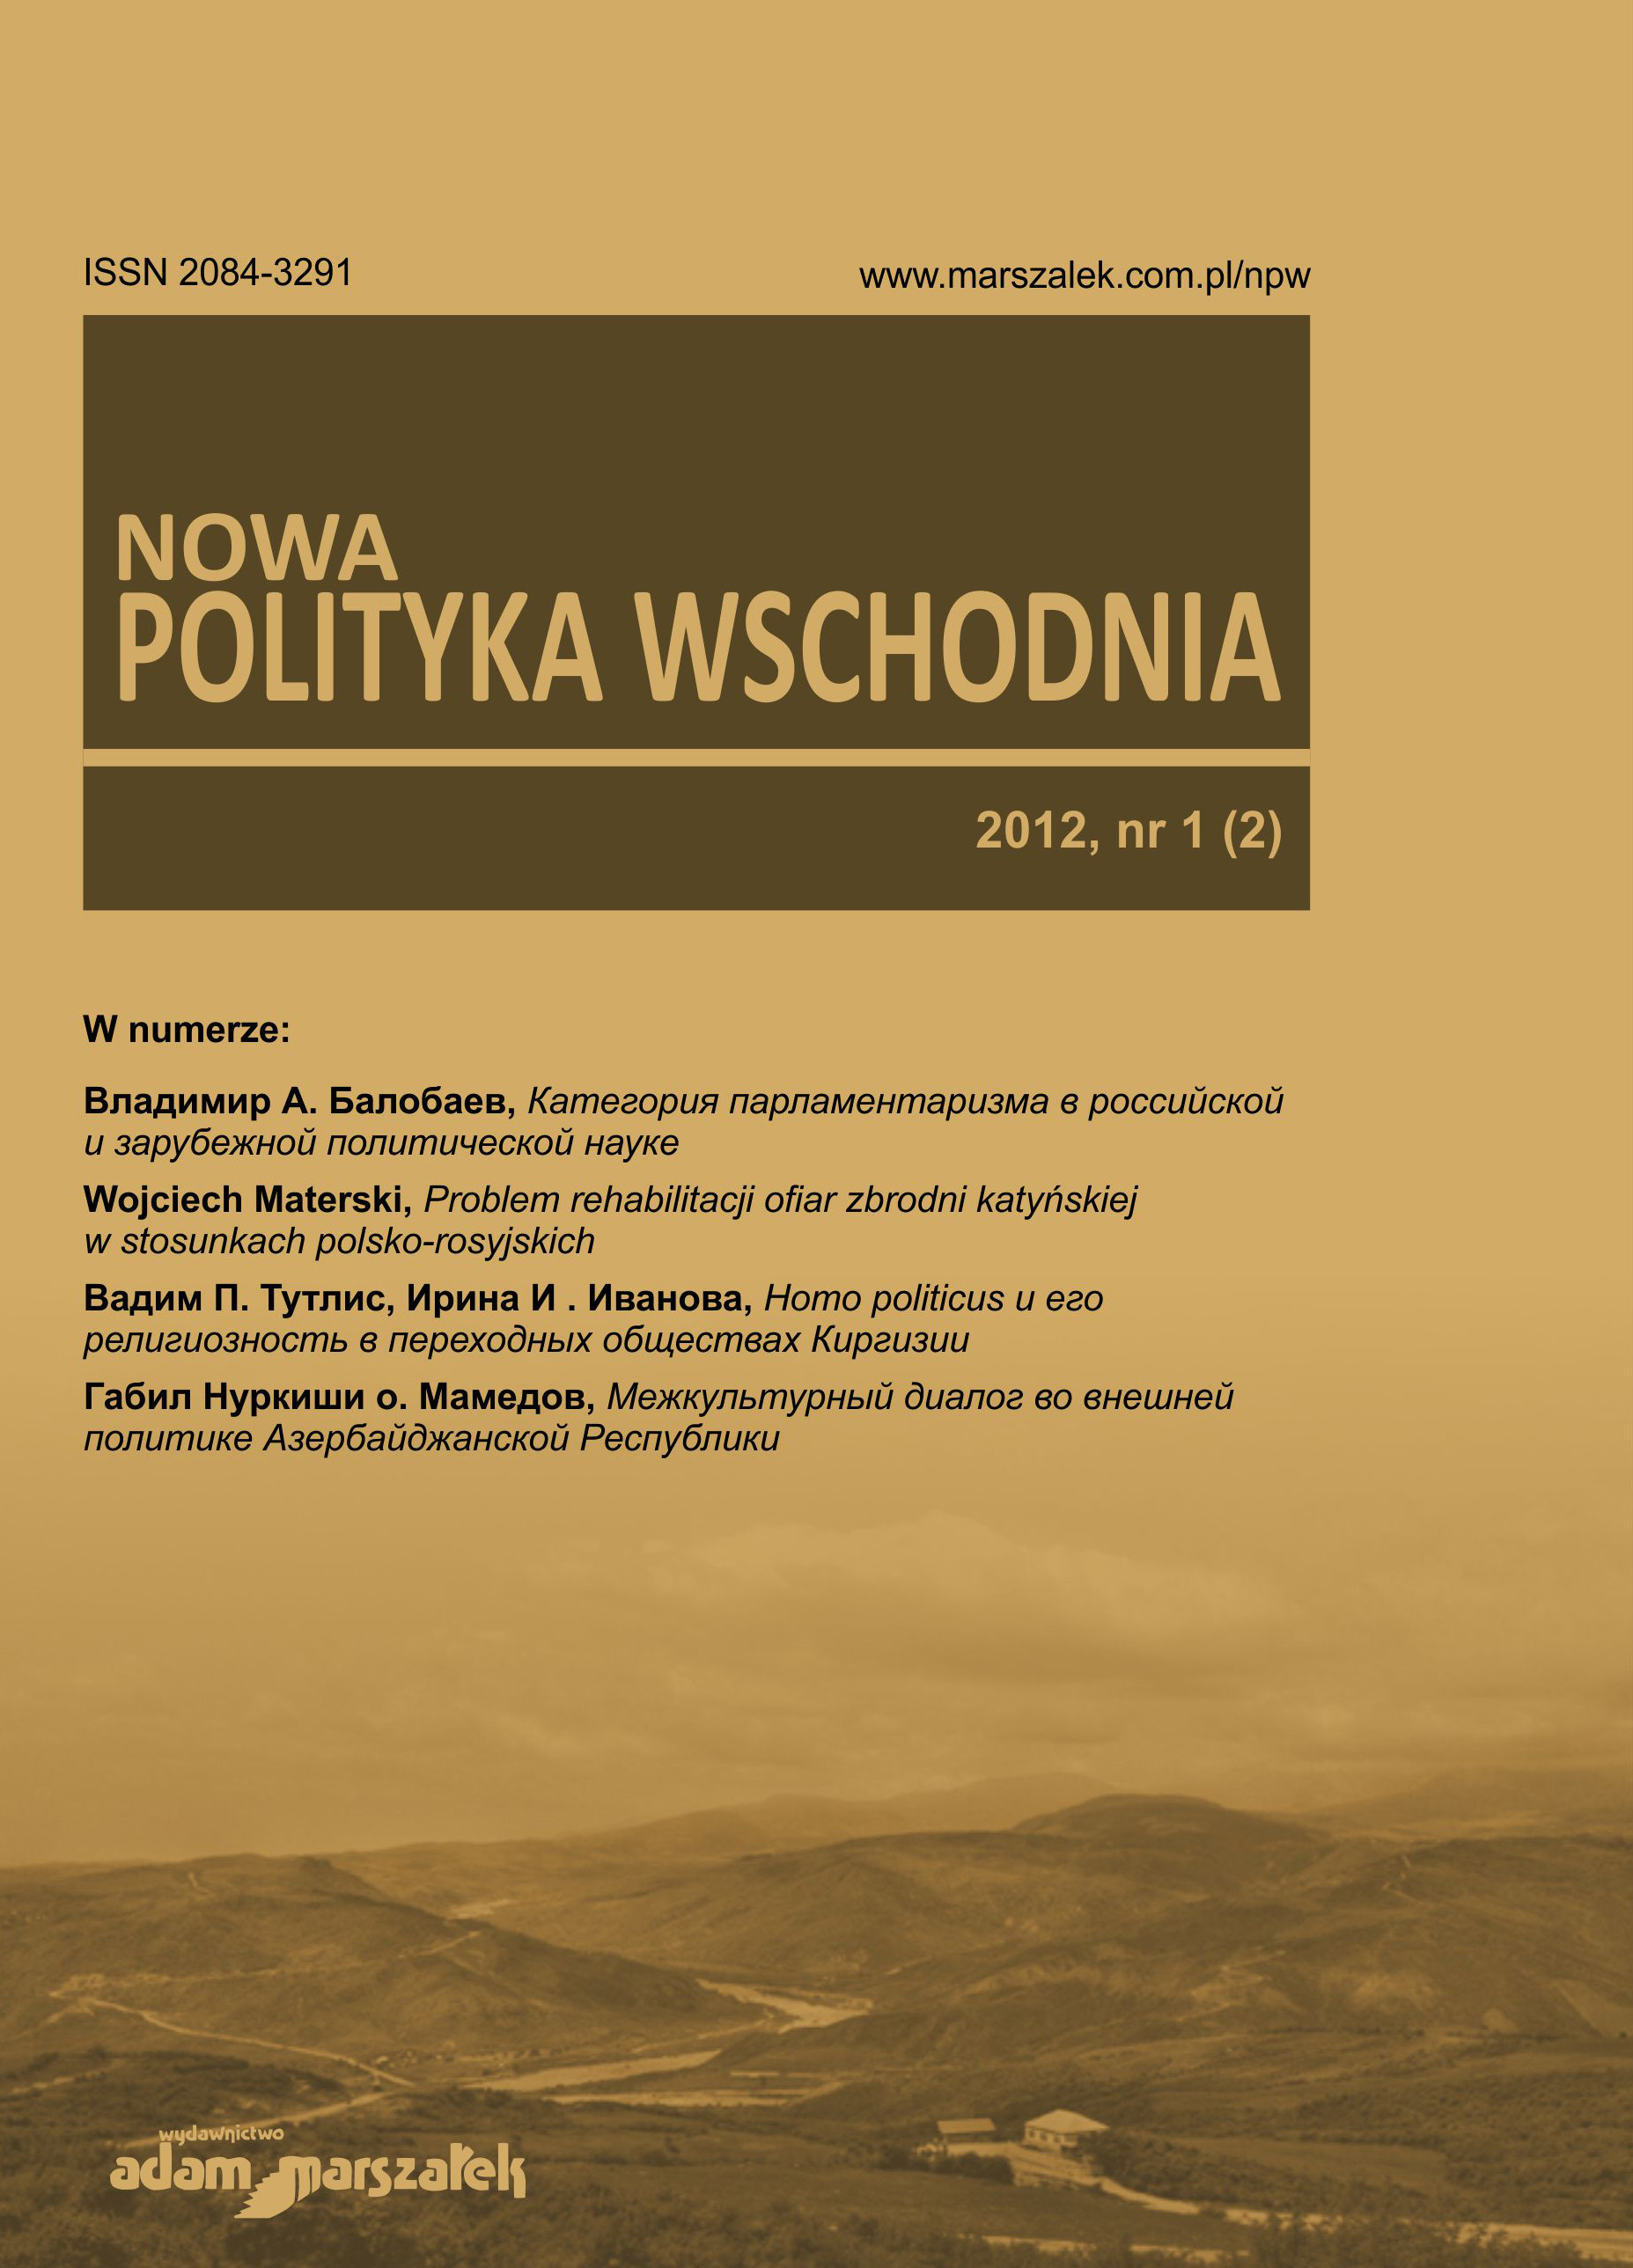 Report on the 6th International Conference „On the
Towards a new political, socio-economic and international order in the region of Central and Eastern Europe” 25–26 VIII 2011 Łódź Cover Image